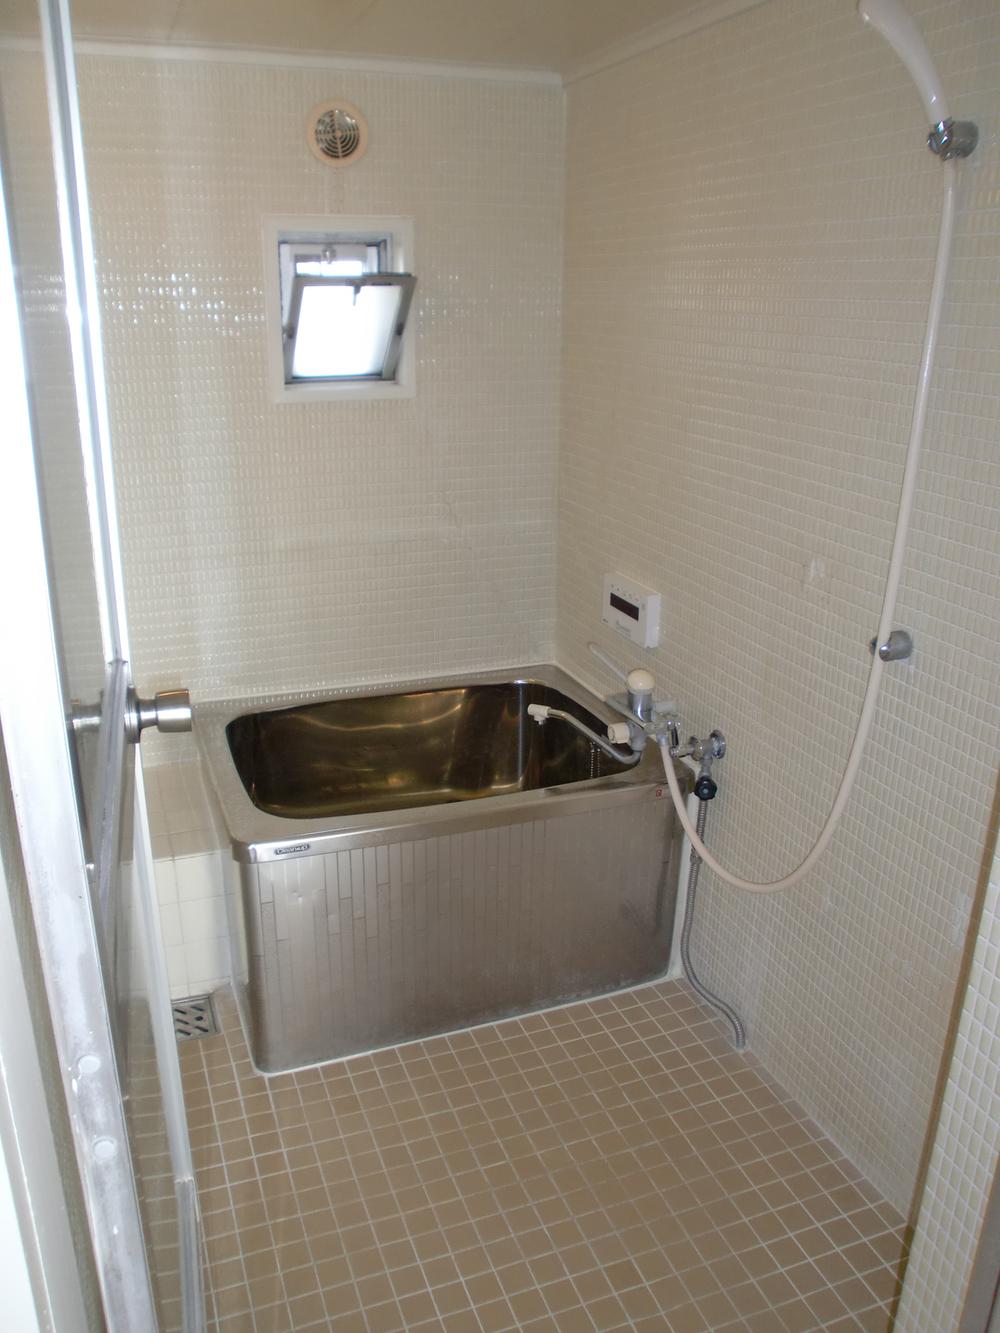 Bathroom. It is the bath that does not feel too much even there cramped window.